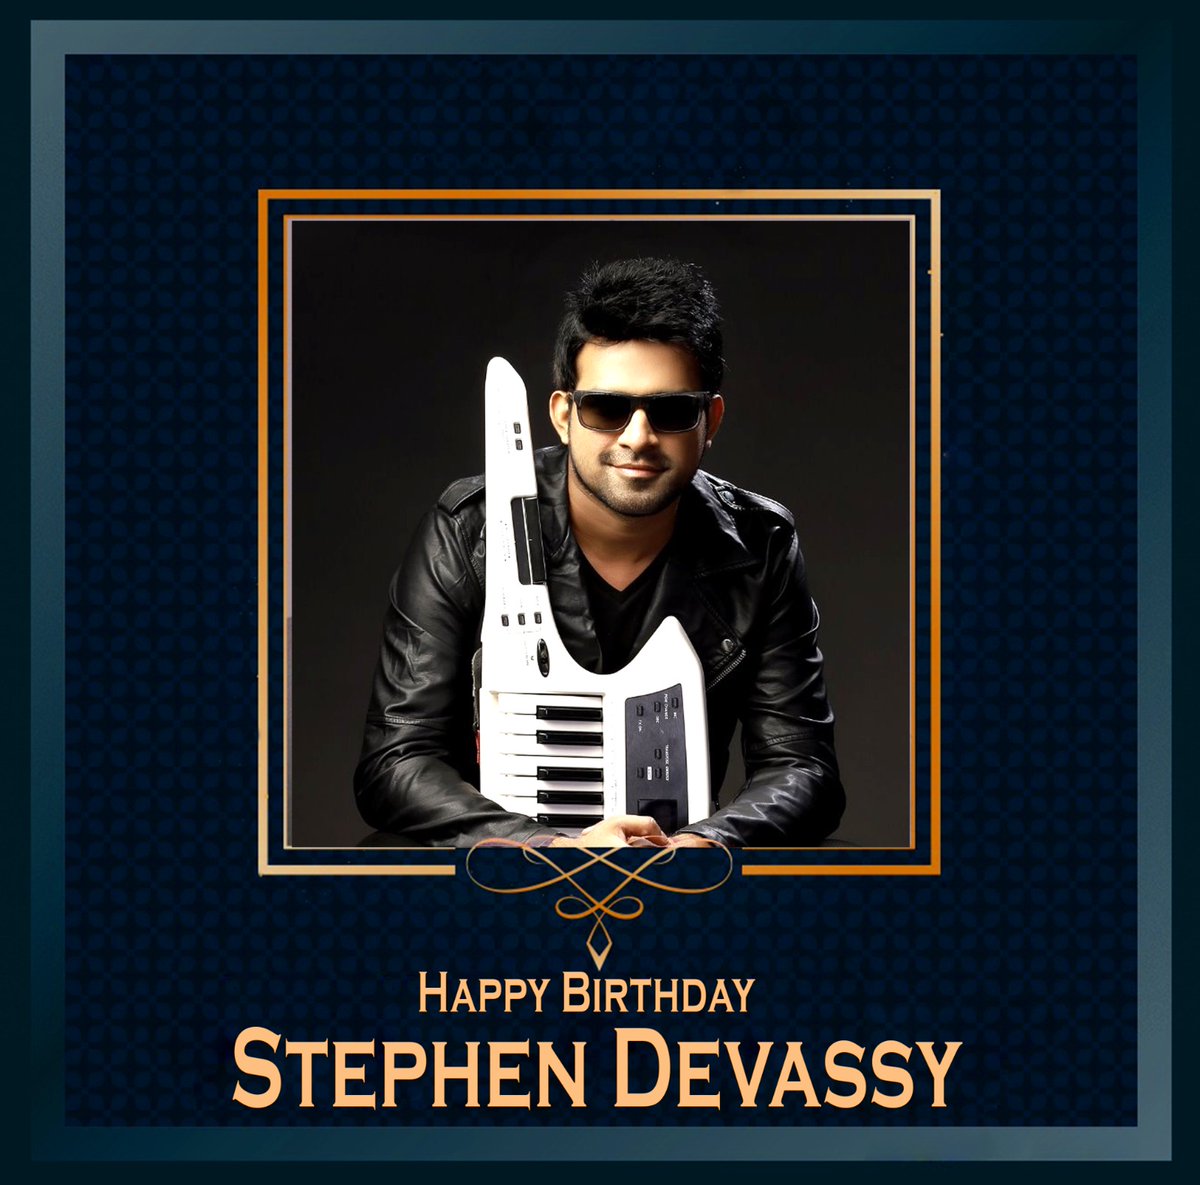 Team #𝐊𝐚𝐧𝐧𝐚𝐩𝐩𝐚🏹 extends warm wishes to the exceptionally talented musician @StephenDevassy, on the occasion of his birthday. Wishing you a fantastic day filled with music, joy, and wonderful memories. @24FramesFactory @avaentofficial @KannappaMovie…